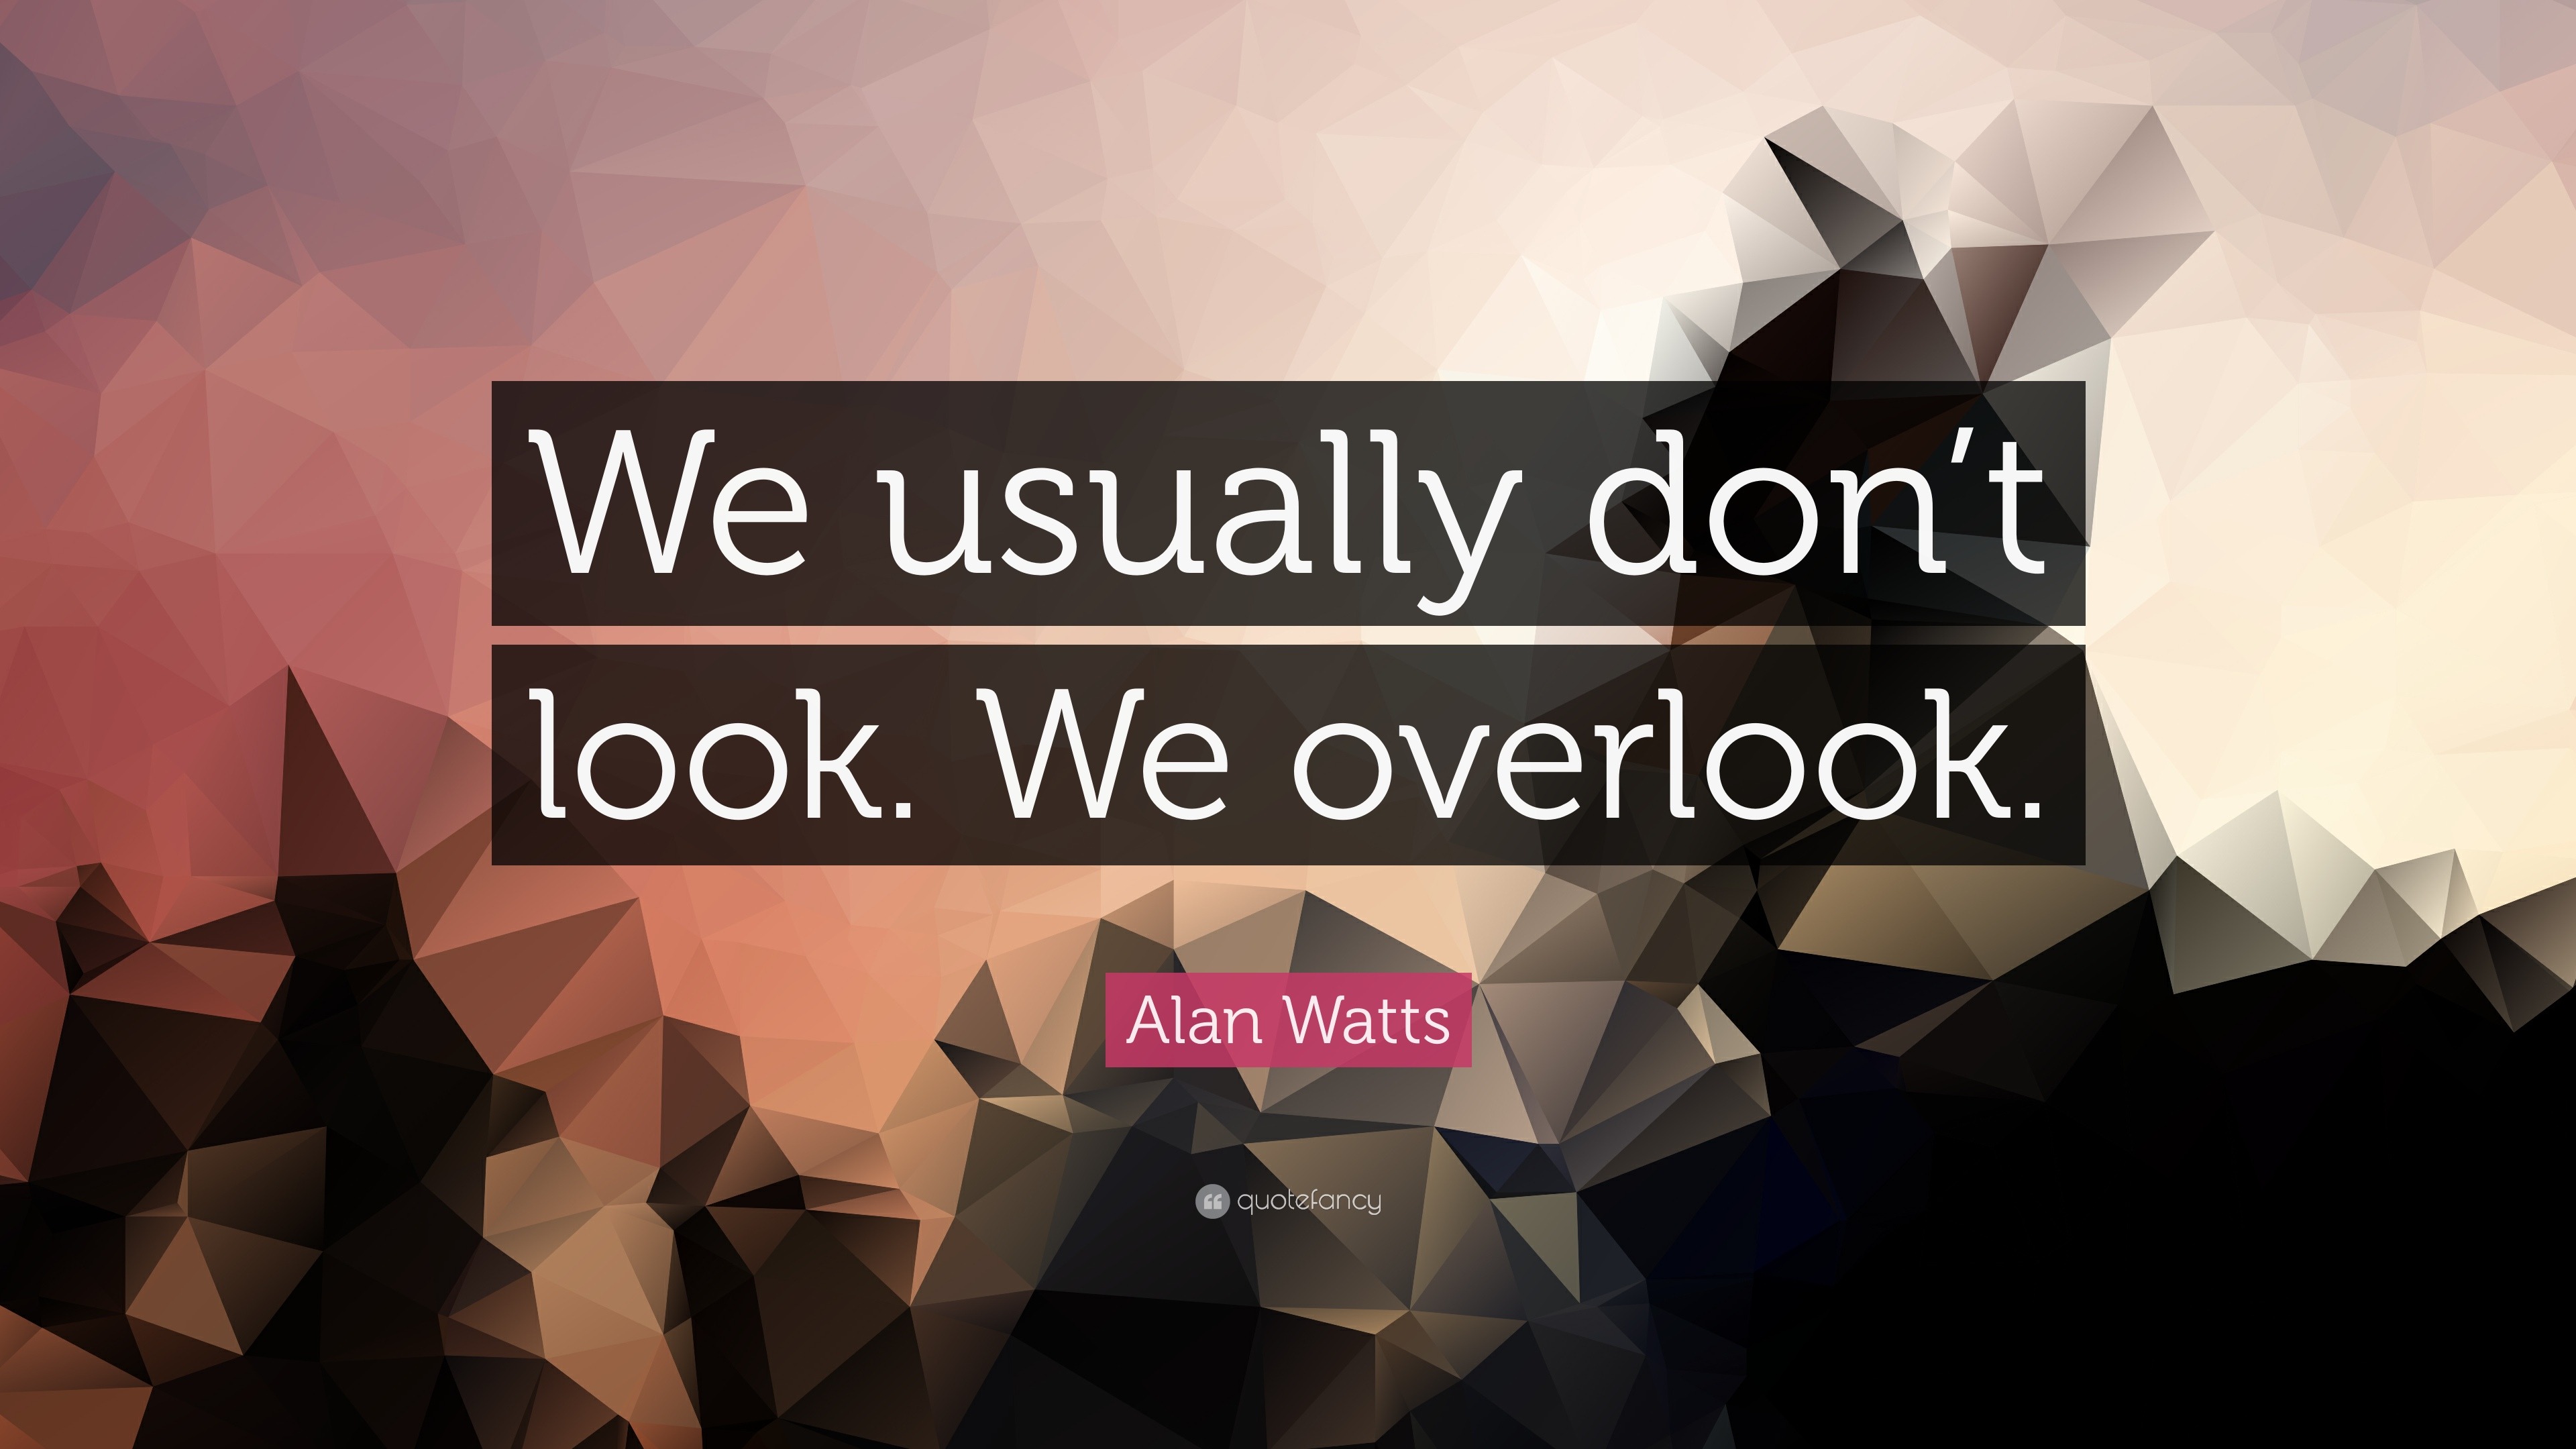 Alan Watts Quote “We usually don t look We overlook ”